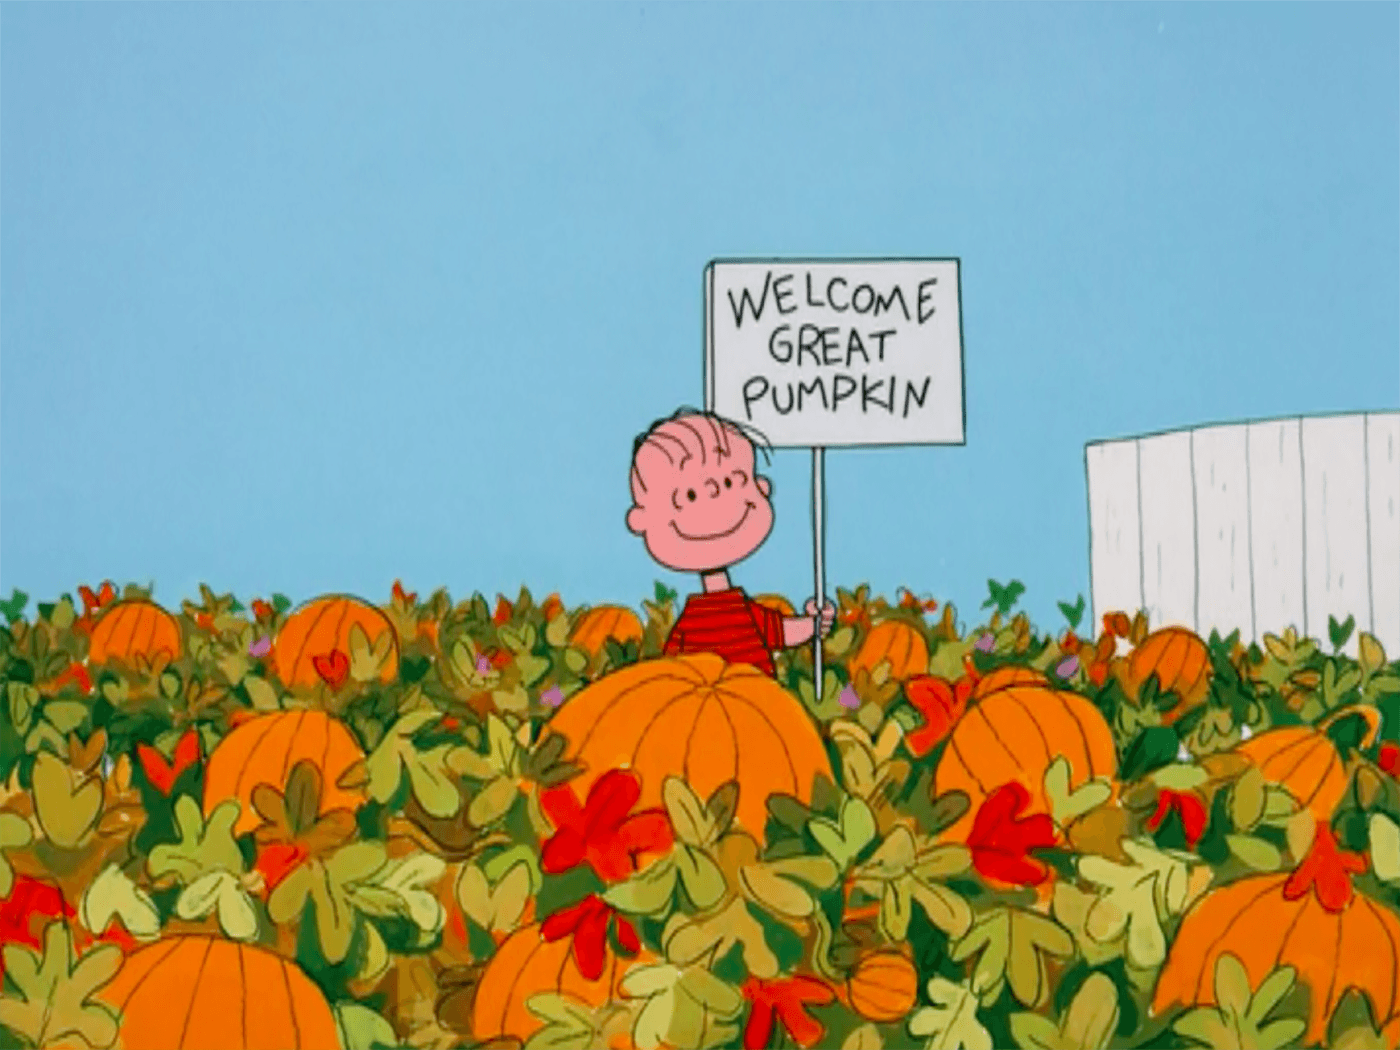 It's the Great Pumpkin, Charlie Brown is a Christmas special wearing